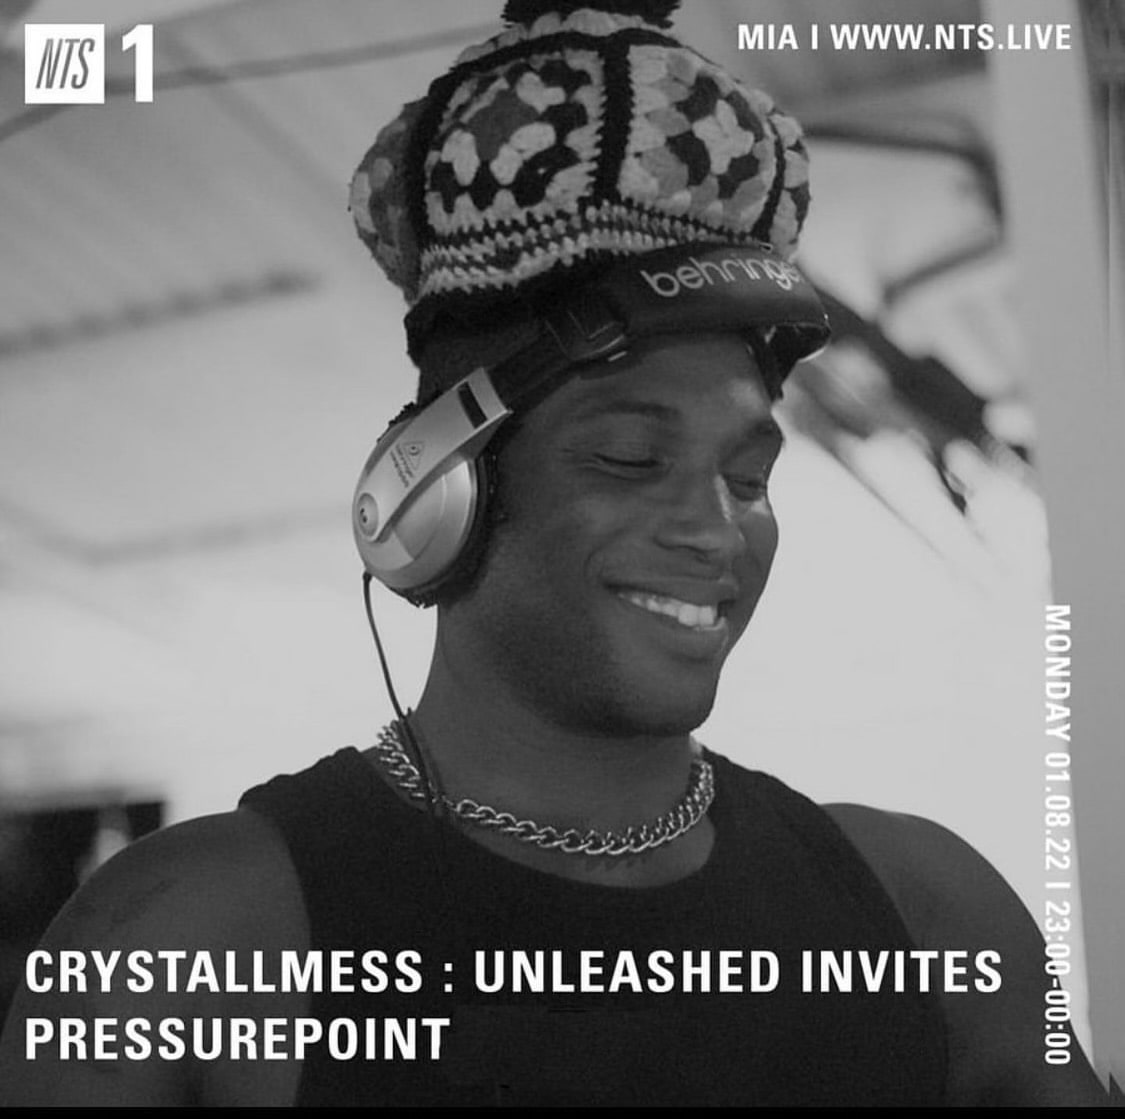 NTS Crystallmess Unleashed Invites Pressurepoint